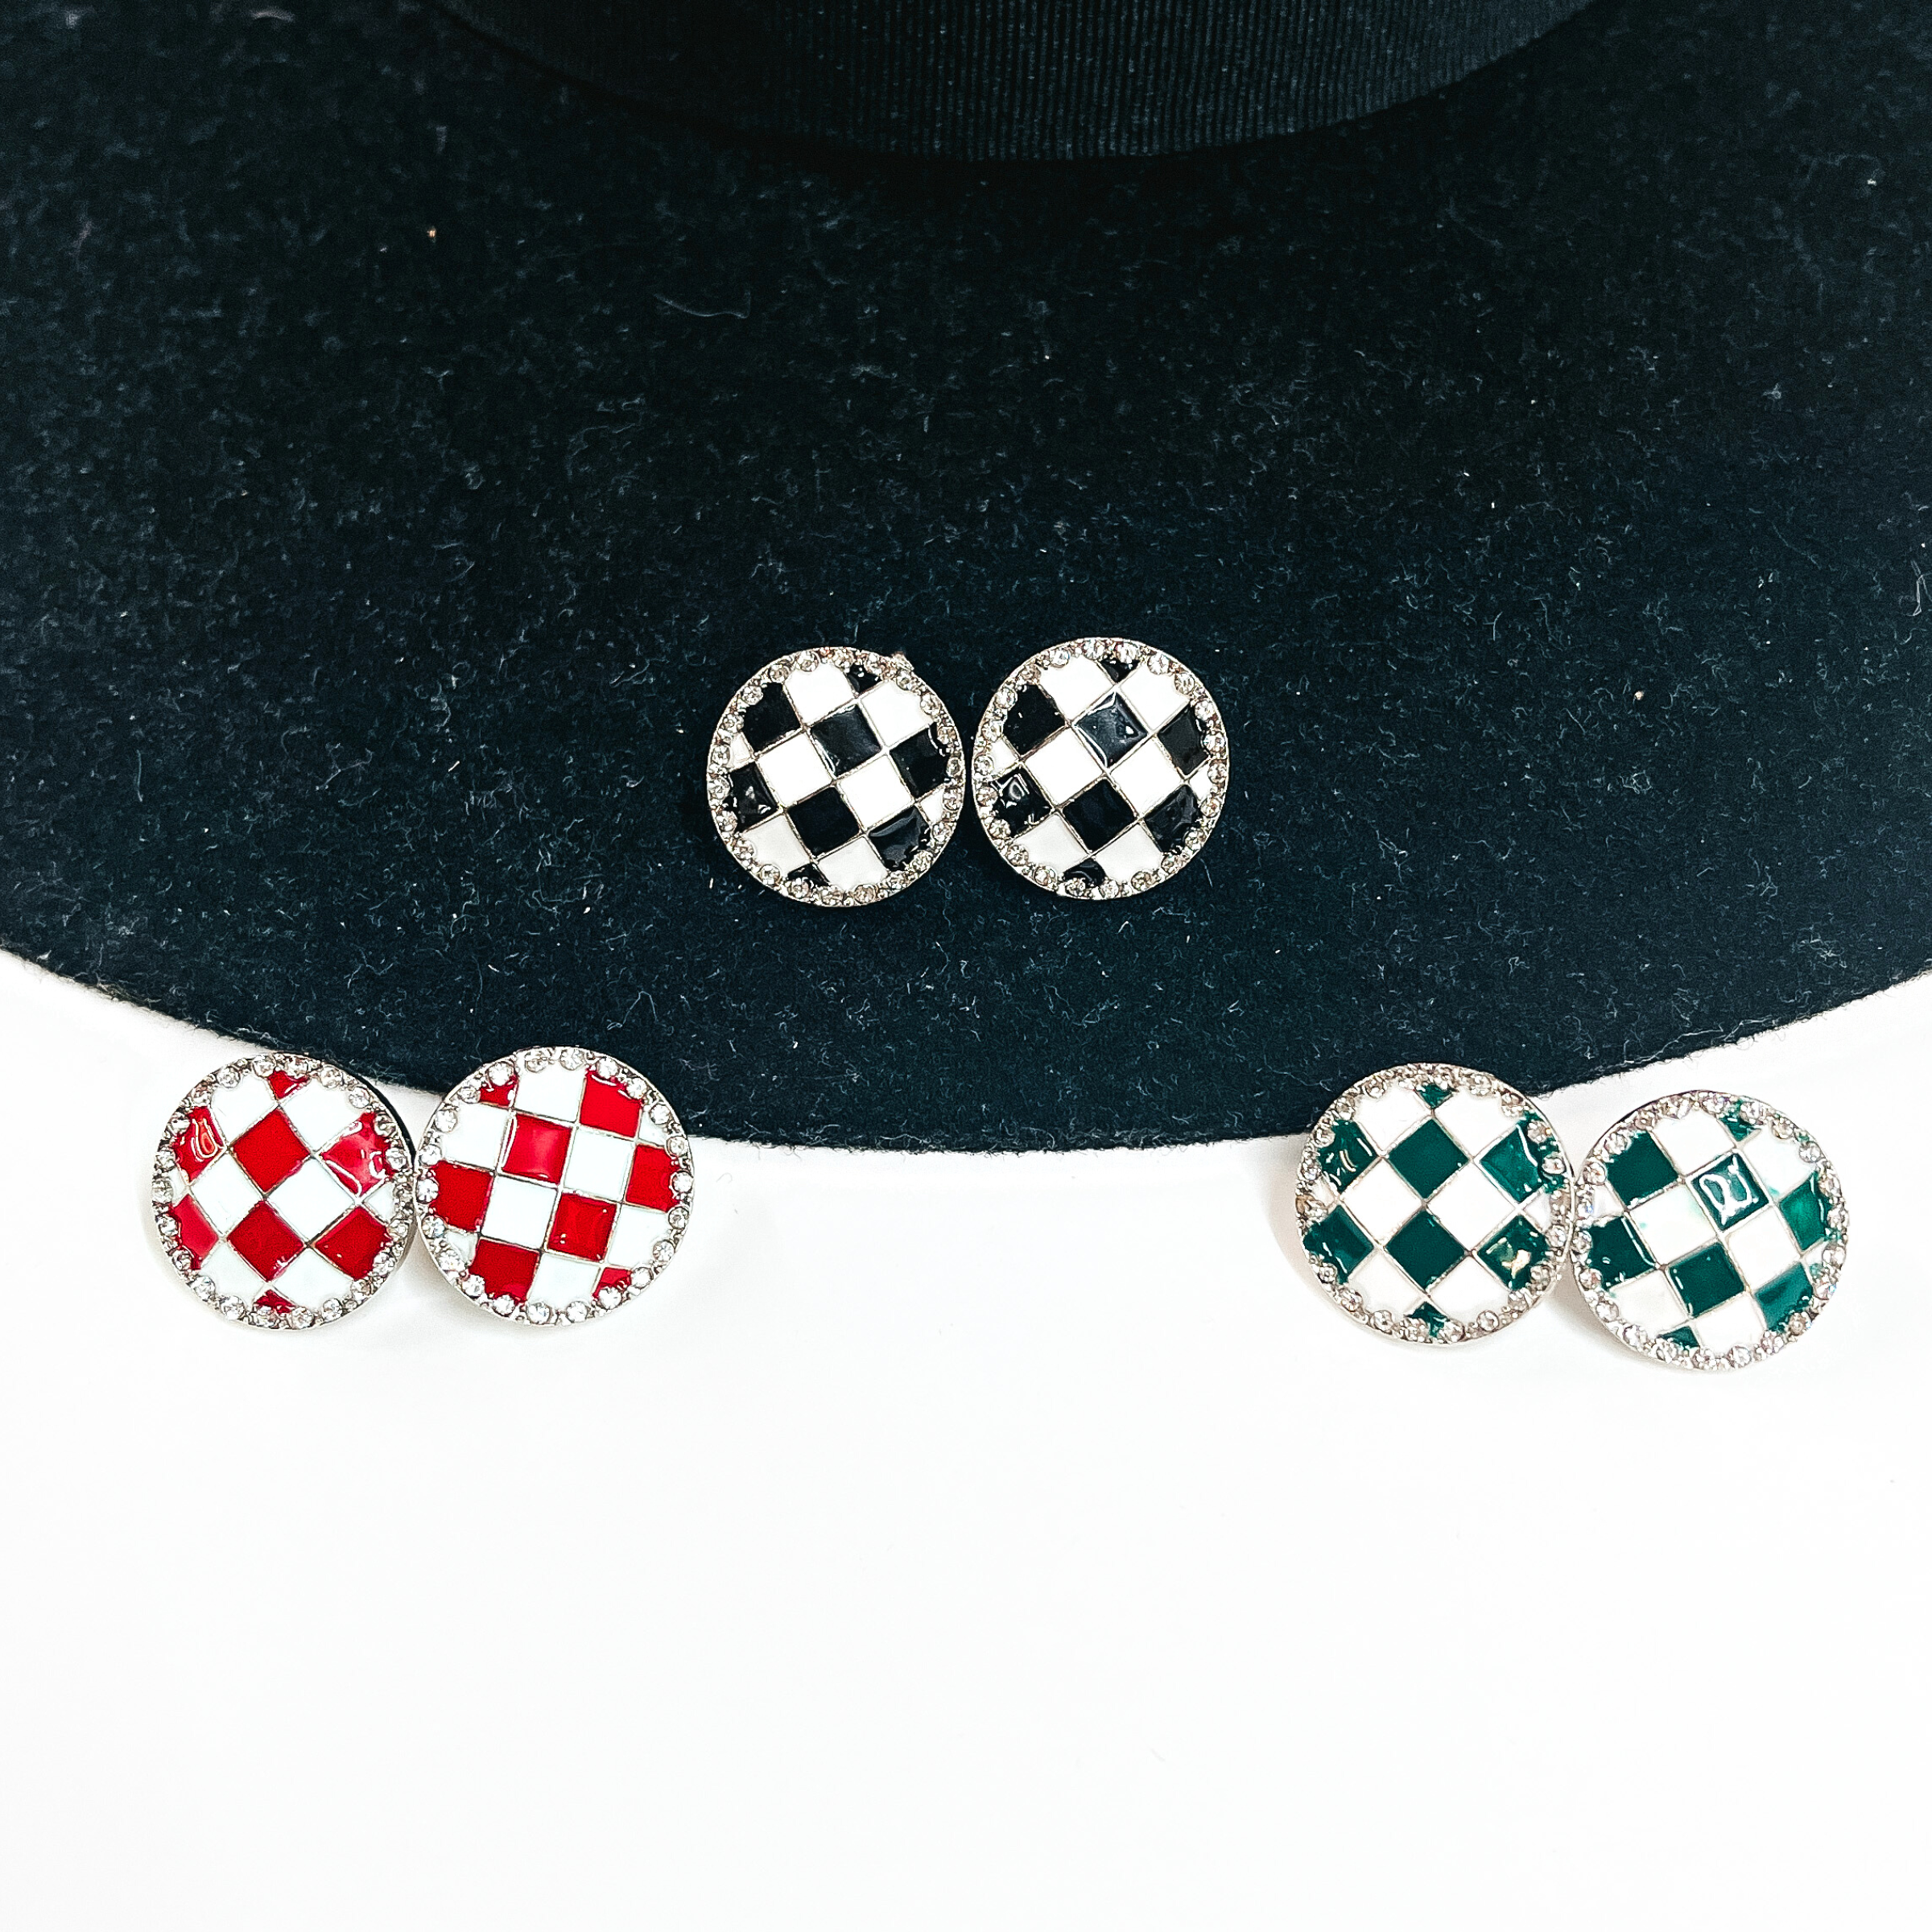 There three pairs of checkered pattern stud earrings in differet colors. From left to right; red/white, black/white, and green/white. These earrings are in a silver setting and have clear crystals all around. These pairs of earrings are laying on a black felt hat brim and on white background.